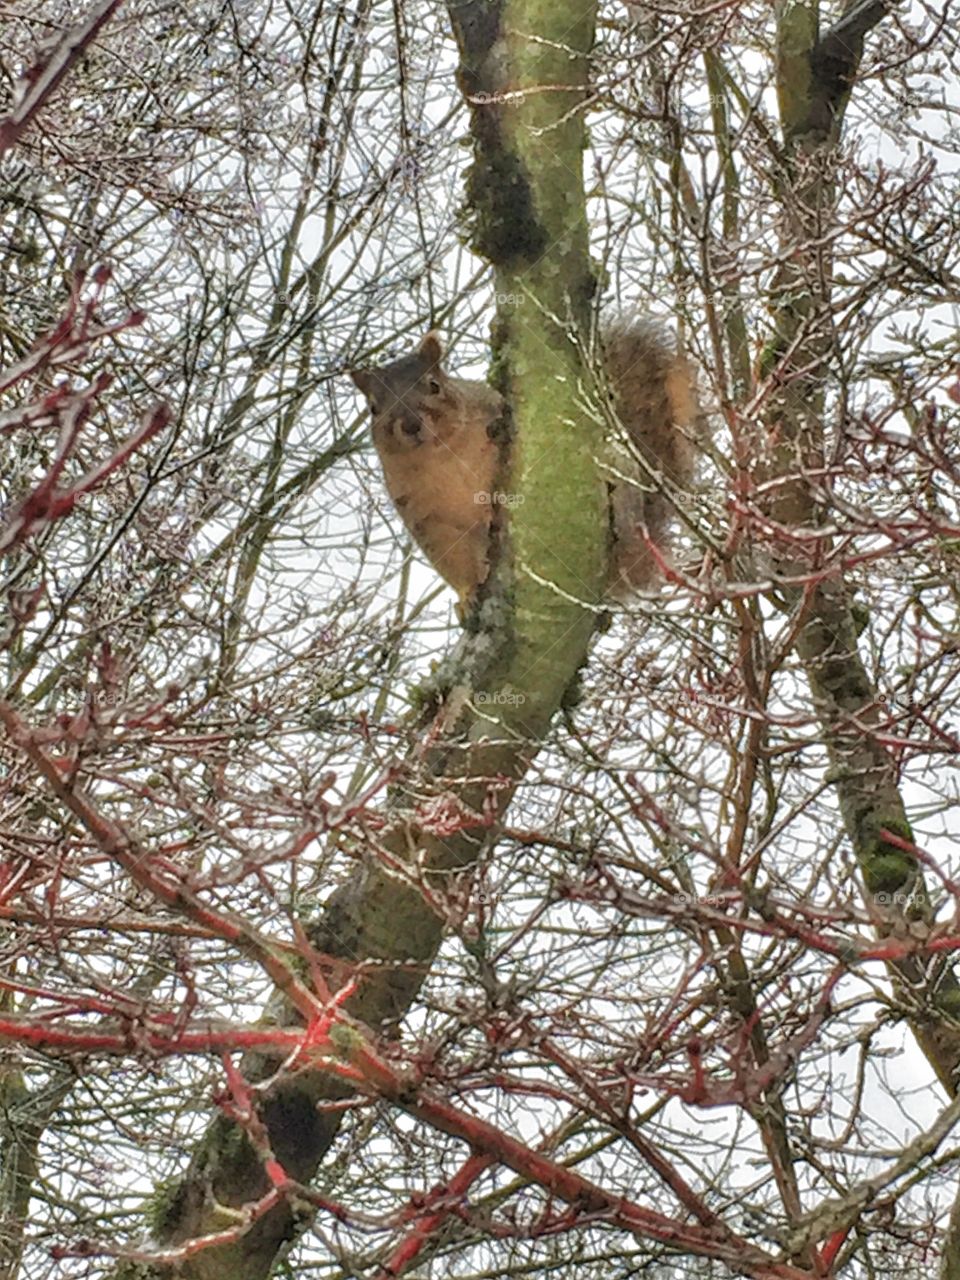 Ice storms in the northwest are no fun for squirrels in trees.